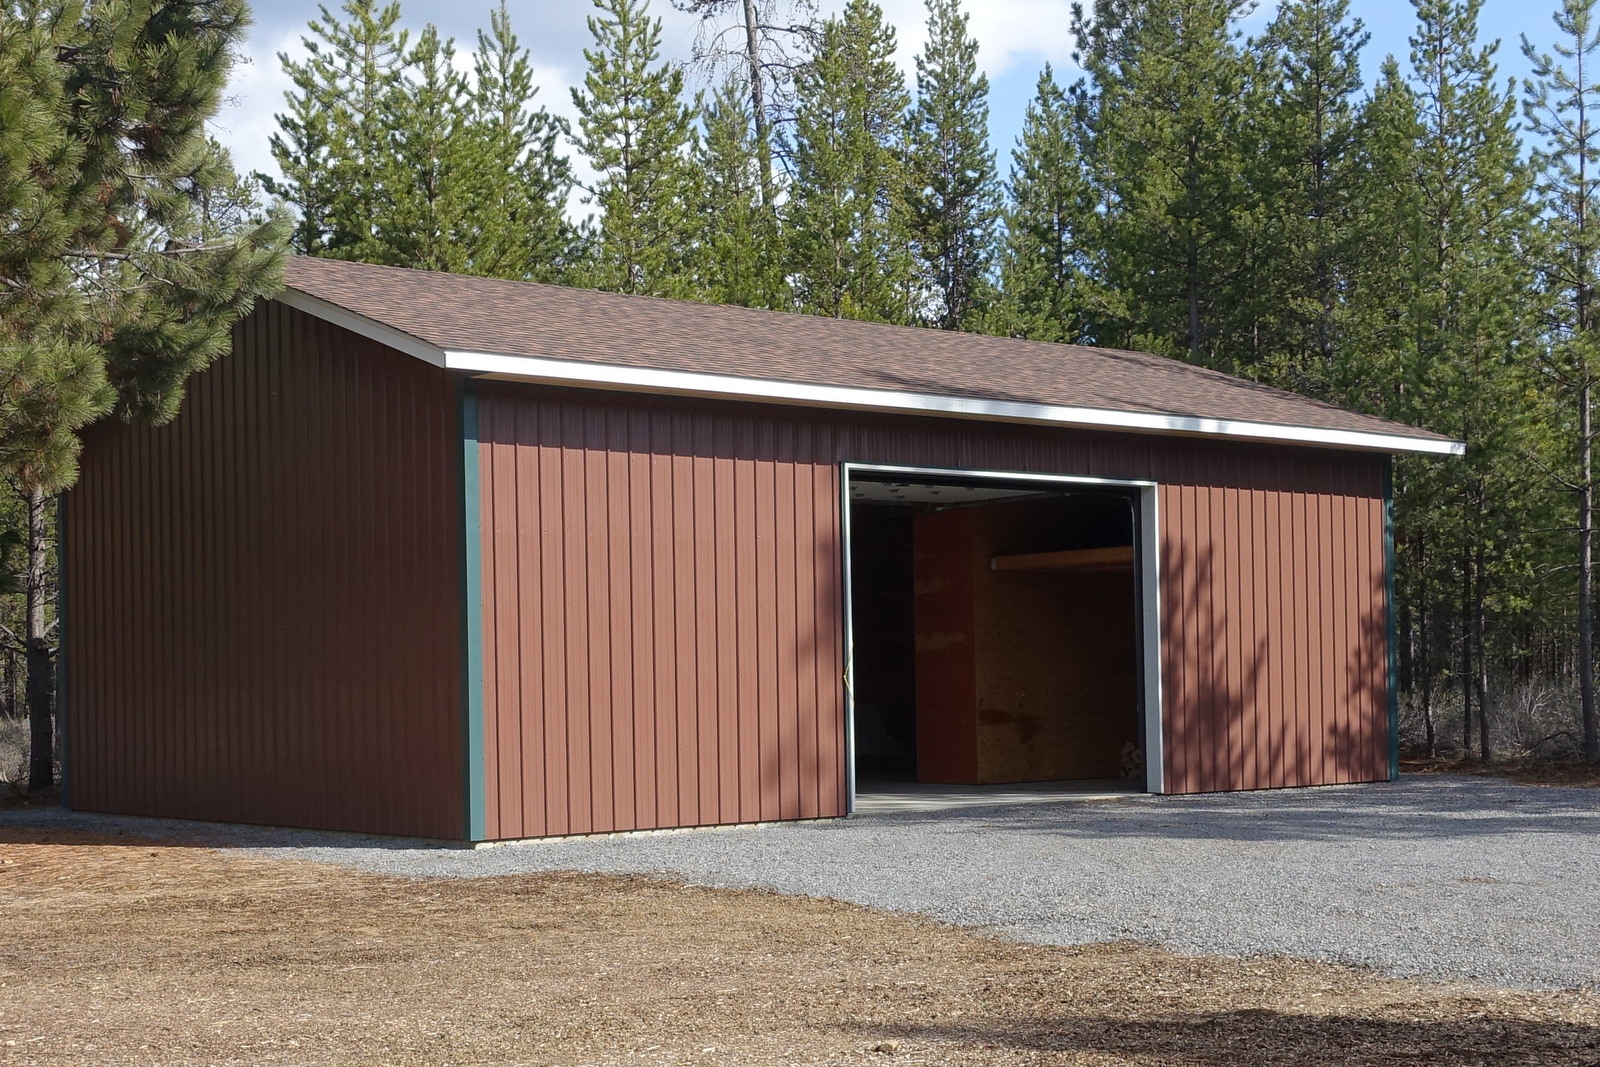 Building sheathed in red steel with large central rollup door.